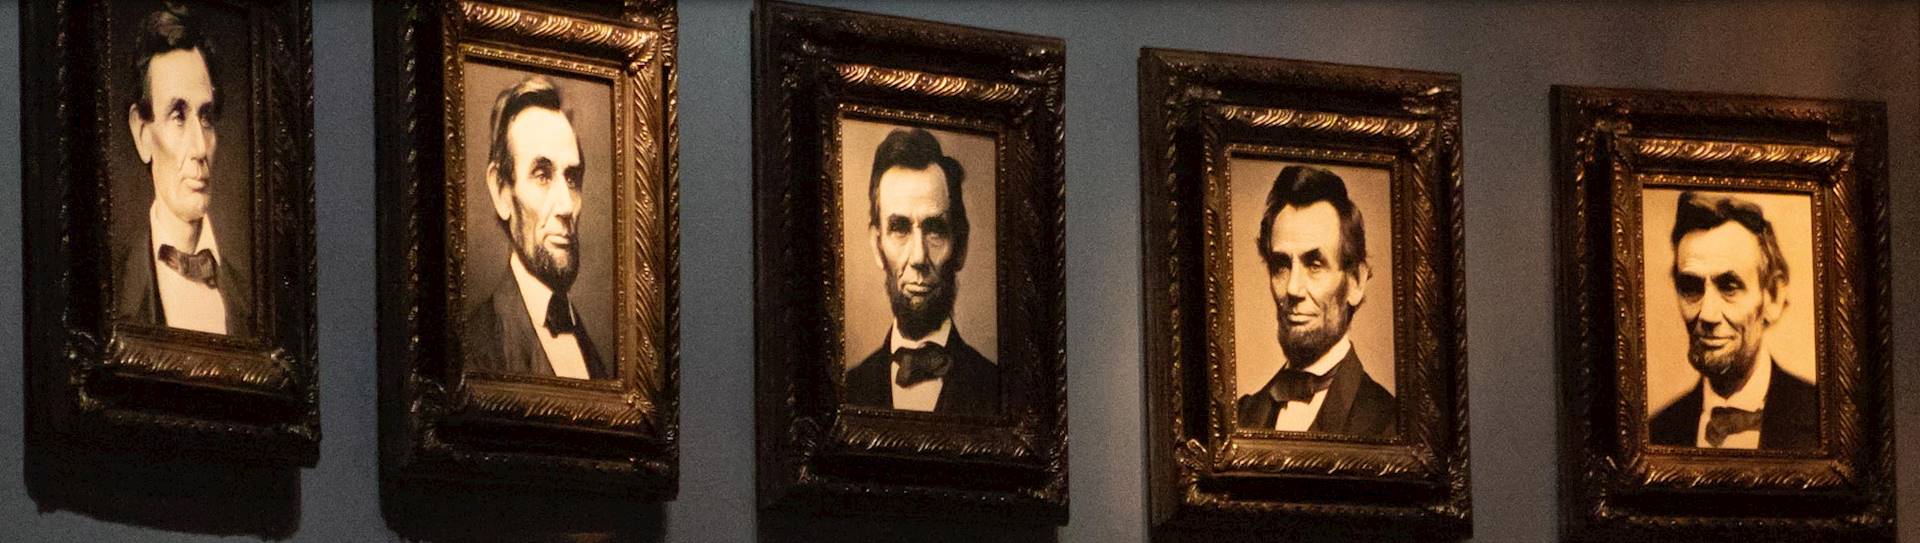 Lincoln Facts | Abraham Lincoln Presidential Library and Museum